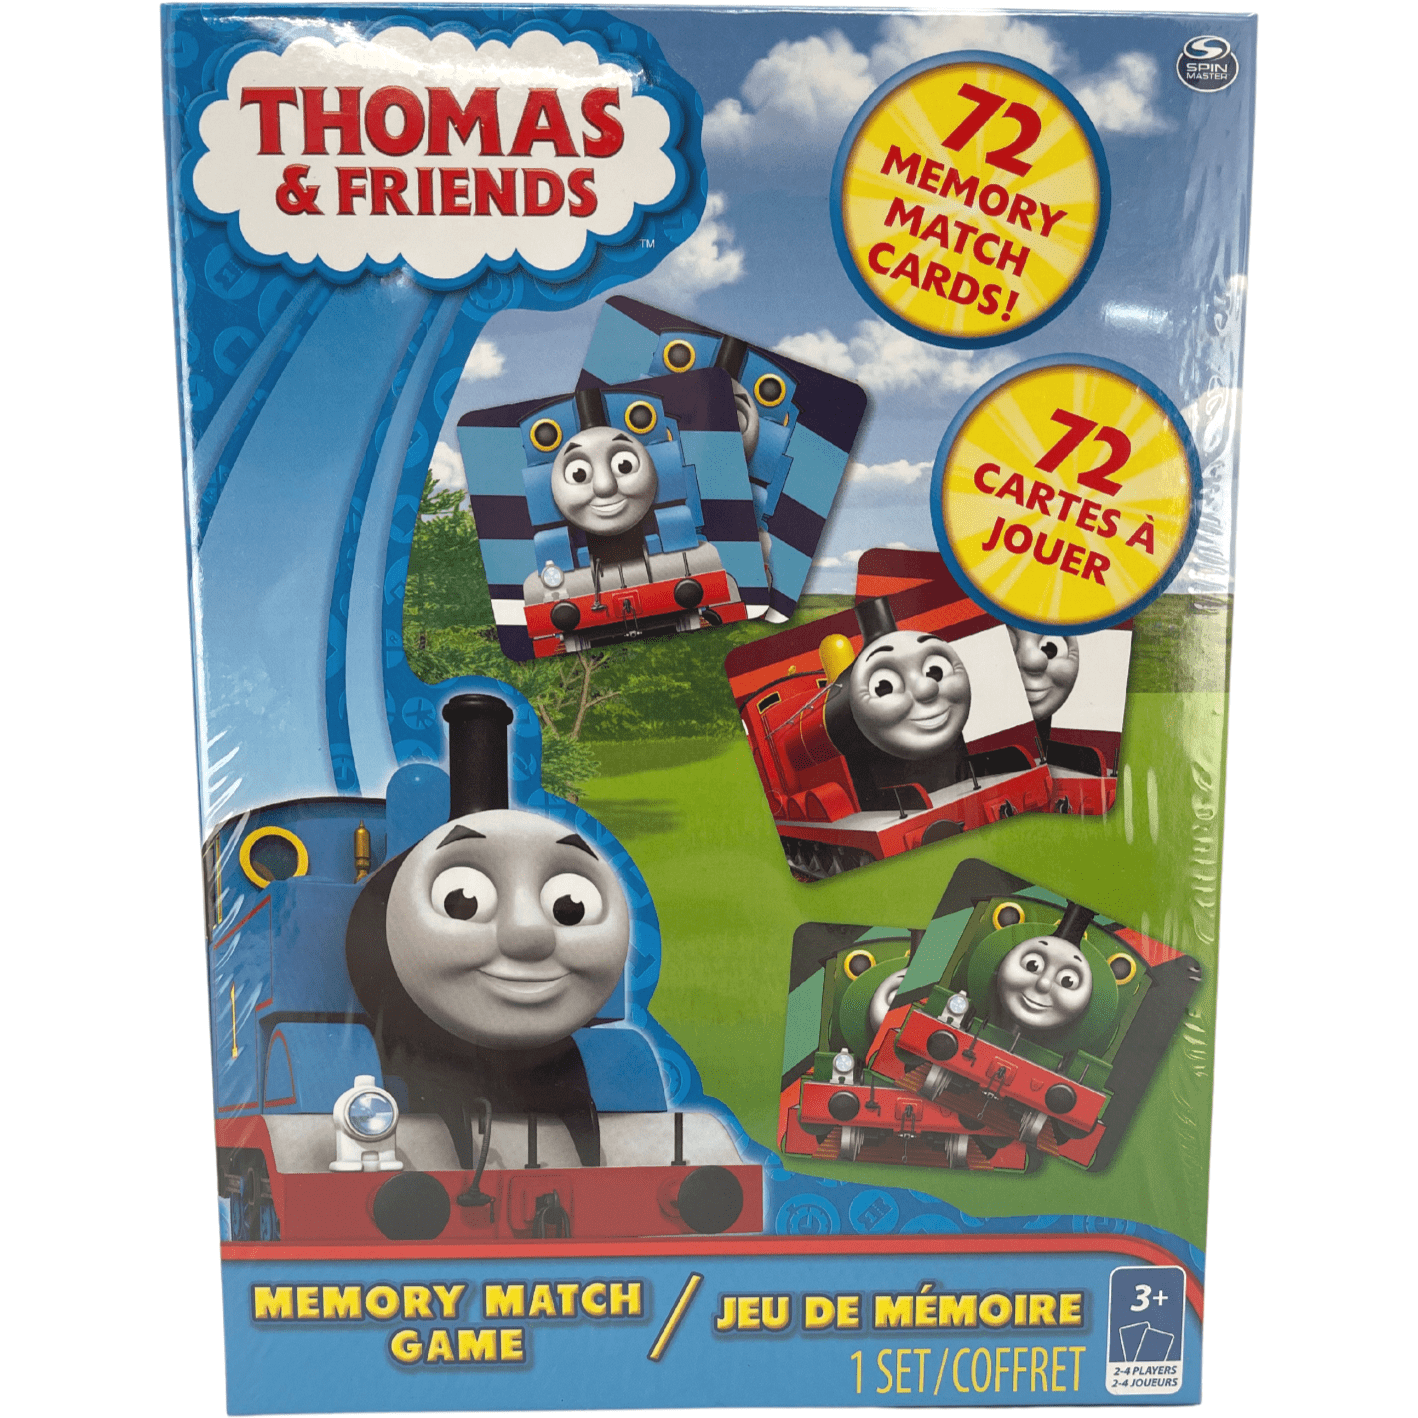 Thomas & Friends Memory Match Game / 72 Cards / Memory Game